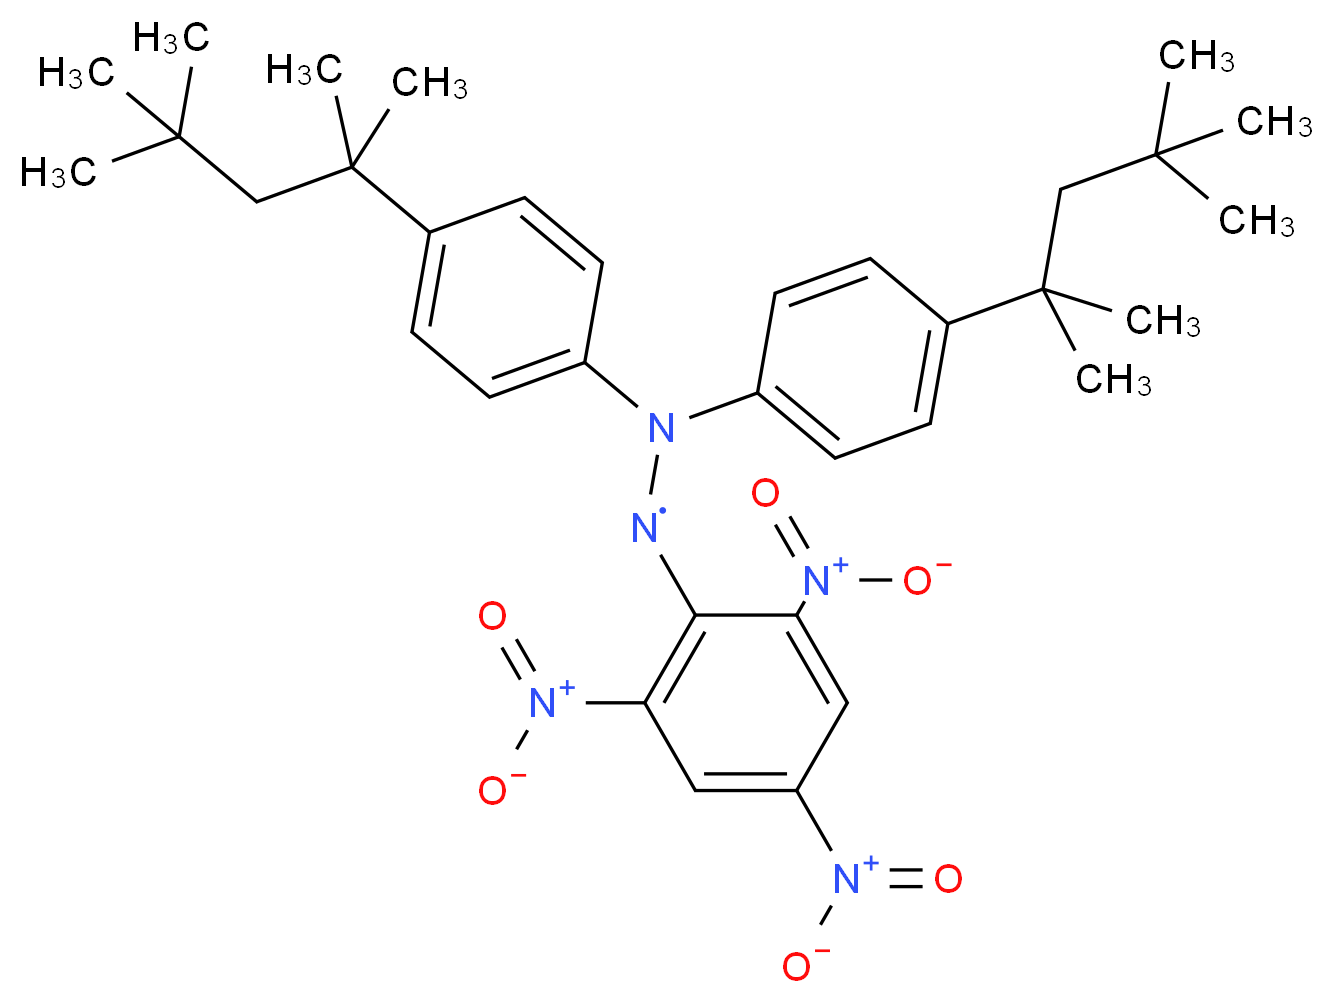 2,2-Di(4-tert-octylphenyl)-1-picrylhydrazyl, free radical_Molecular_structure_CAS_84077-81-6)